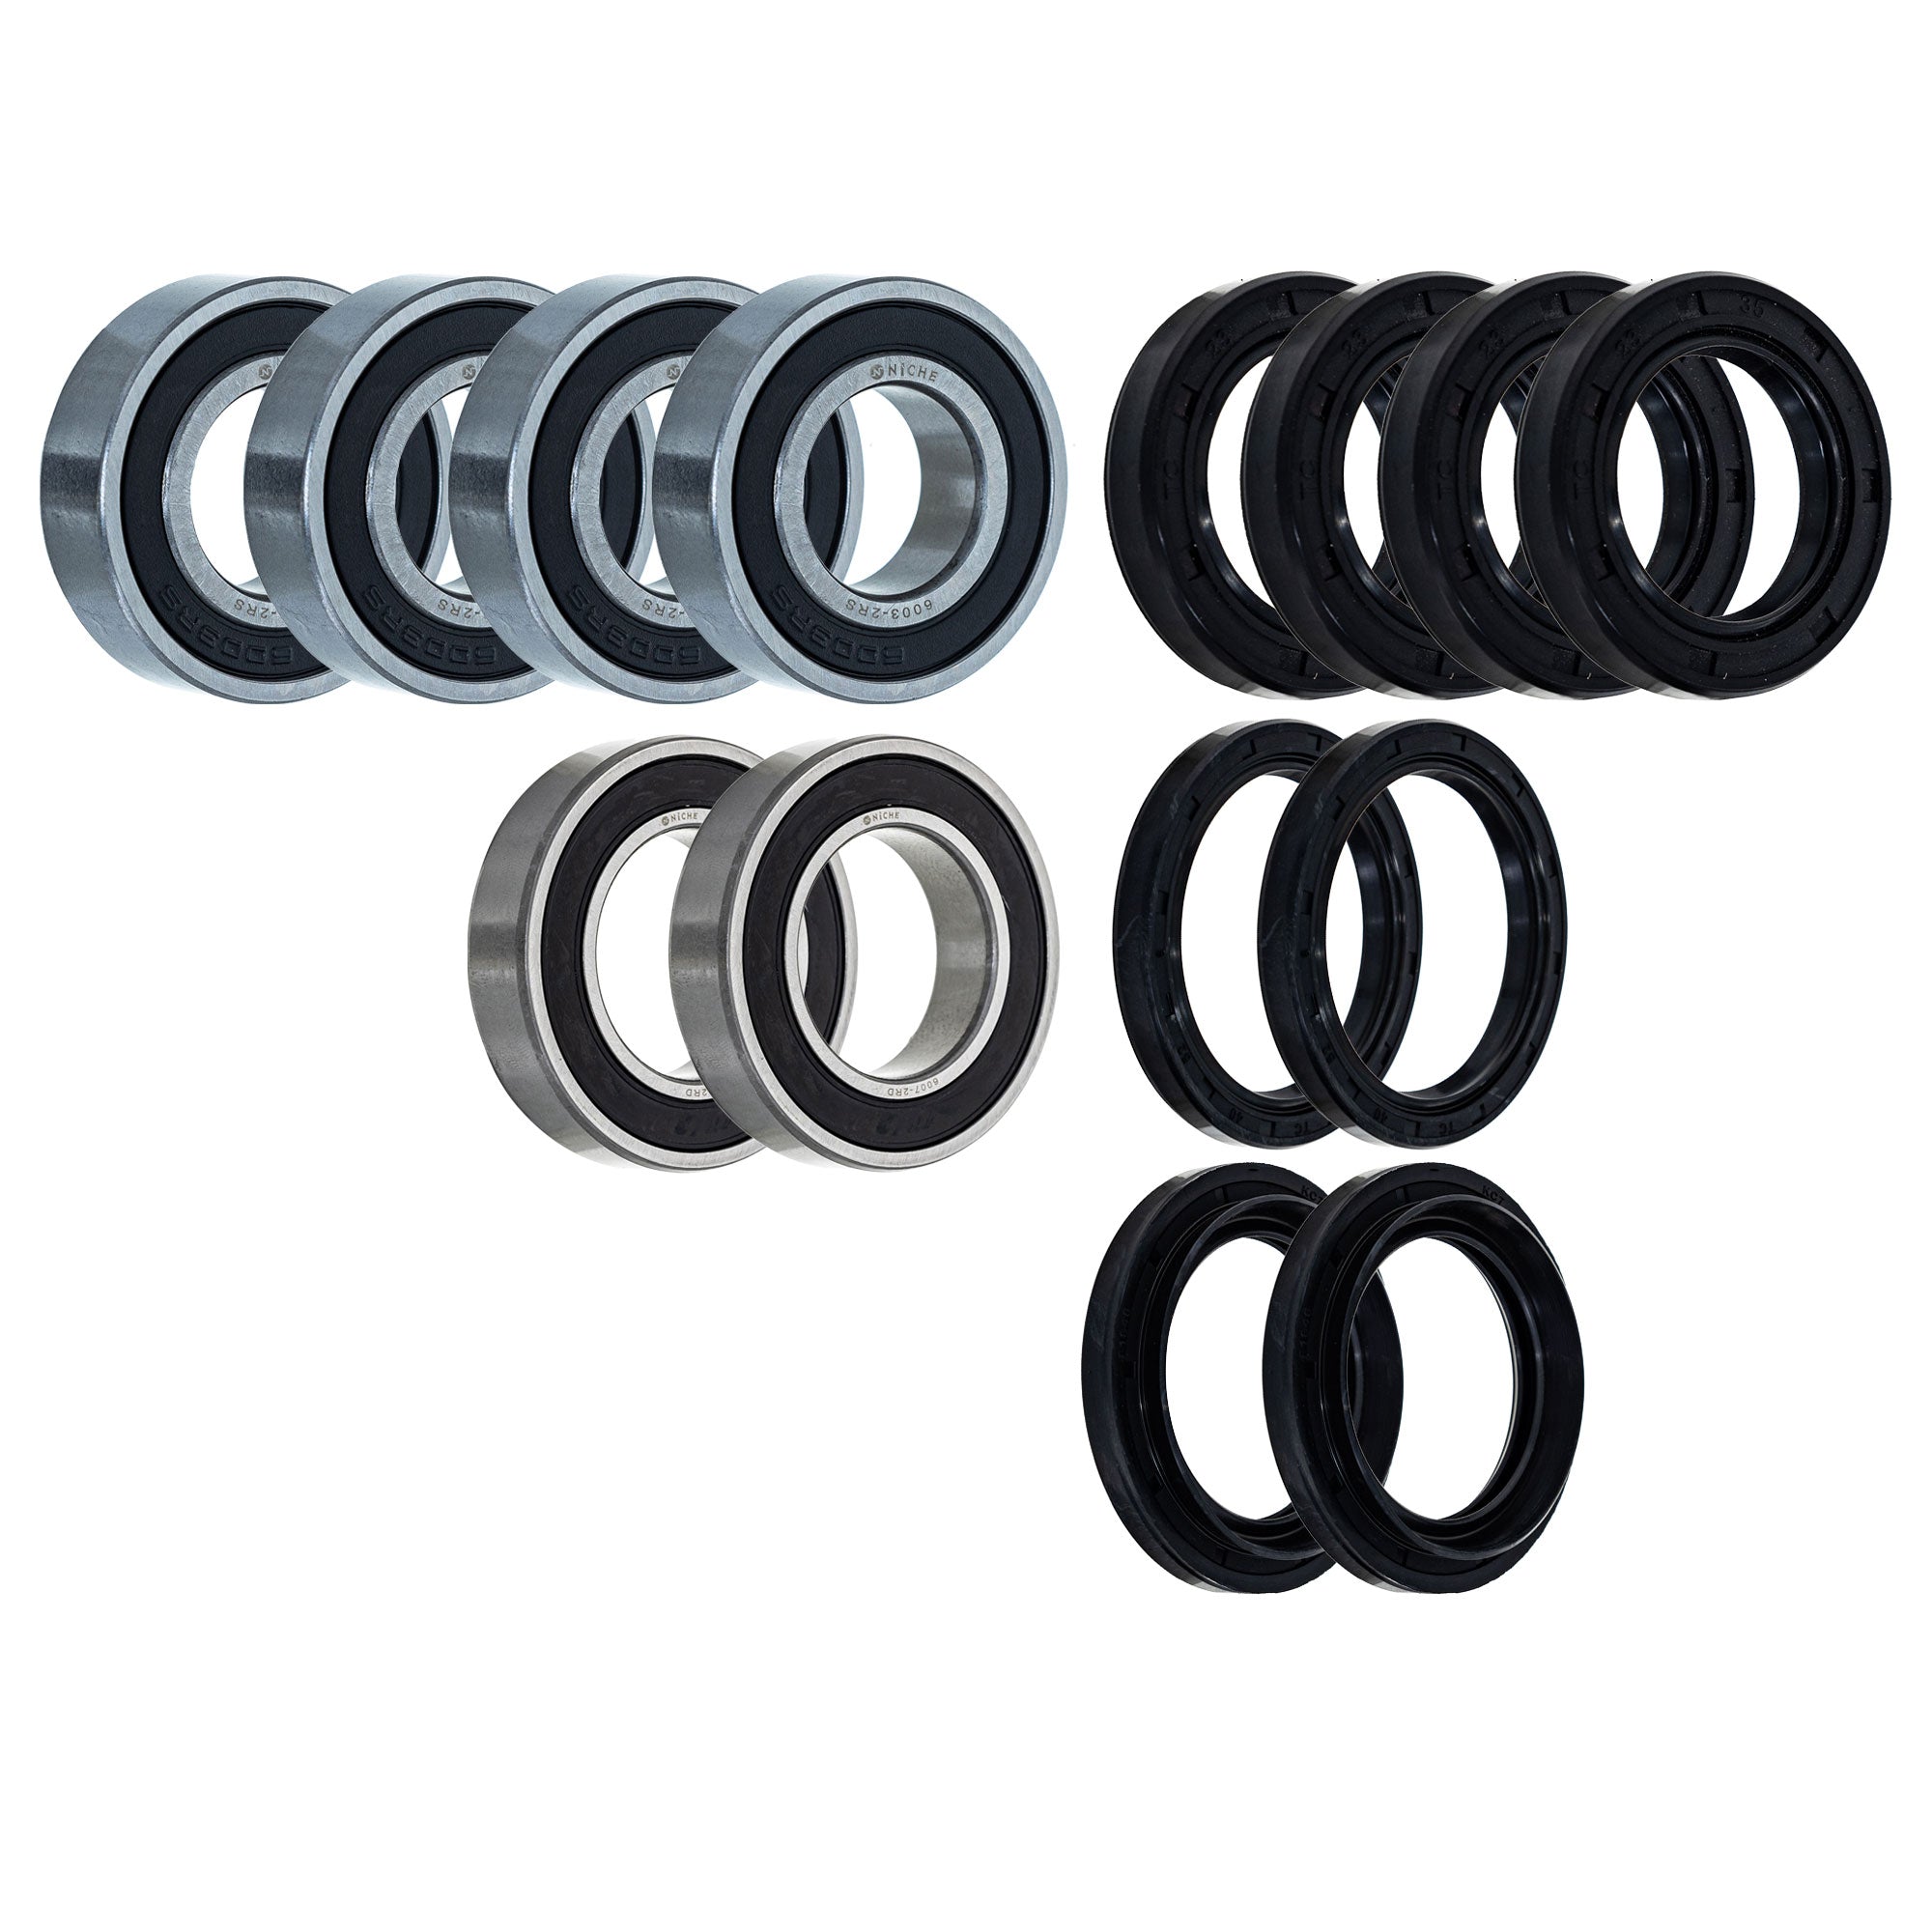 Wheel Bearing Seal Kit for zOTHER Grizzly NICHE MK1008433